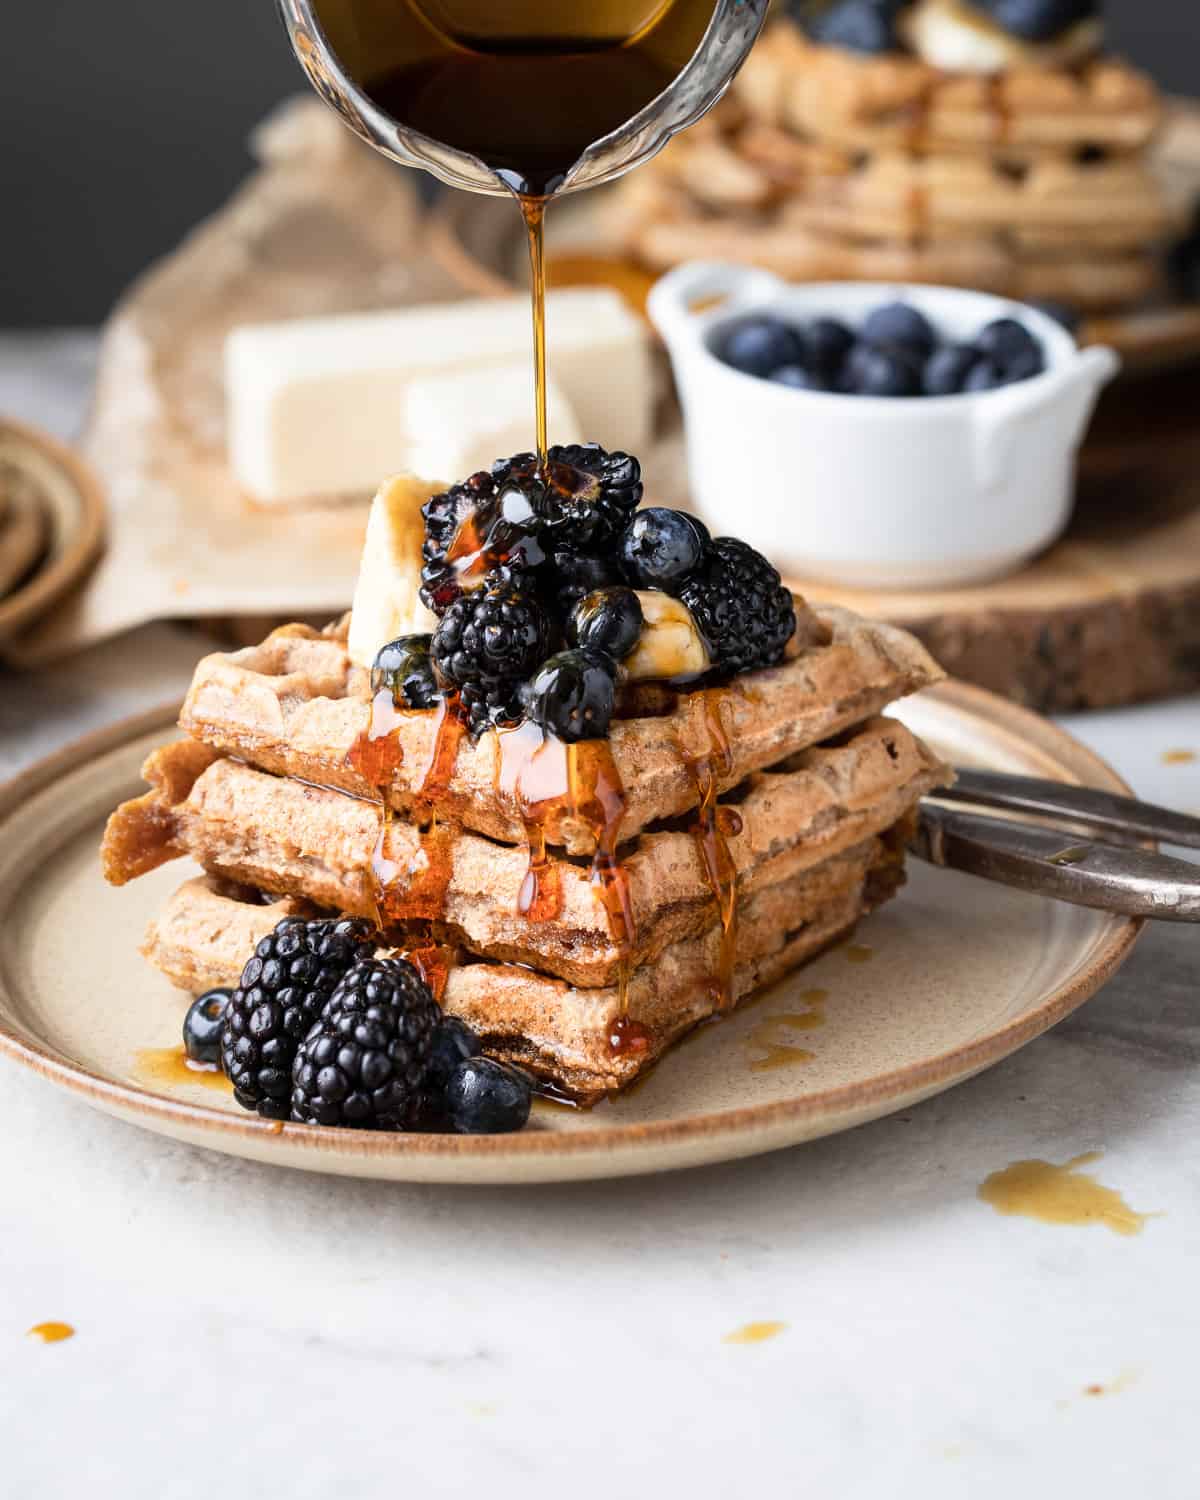 A stack of dairy free waffles with maple syrup being drizzled on top. The waffles have fresh fruit on top and is for a recipe post.